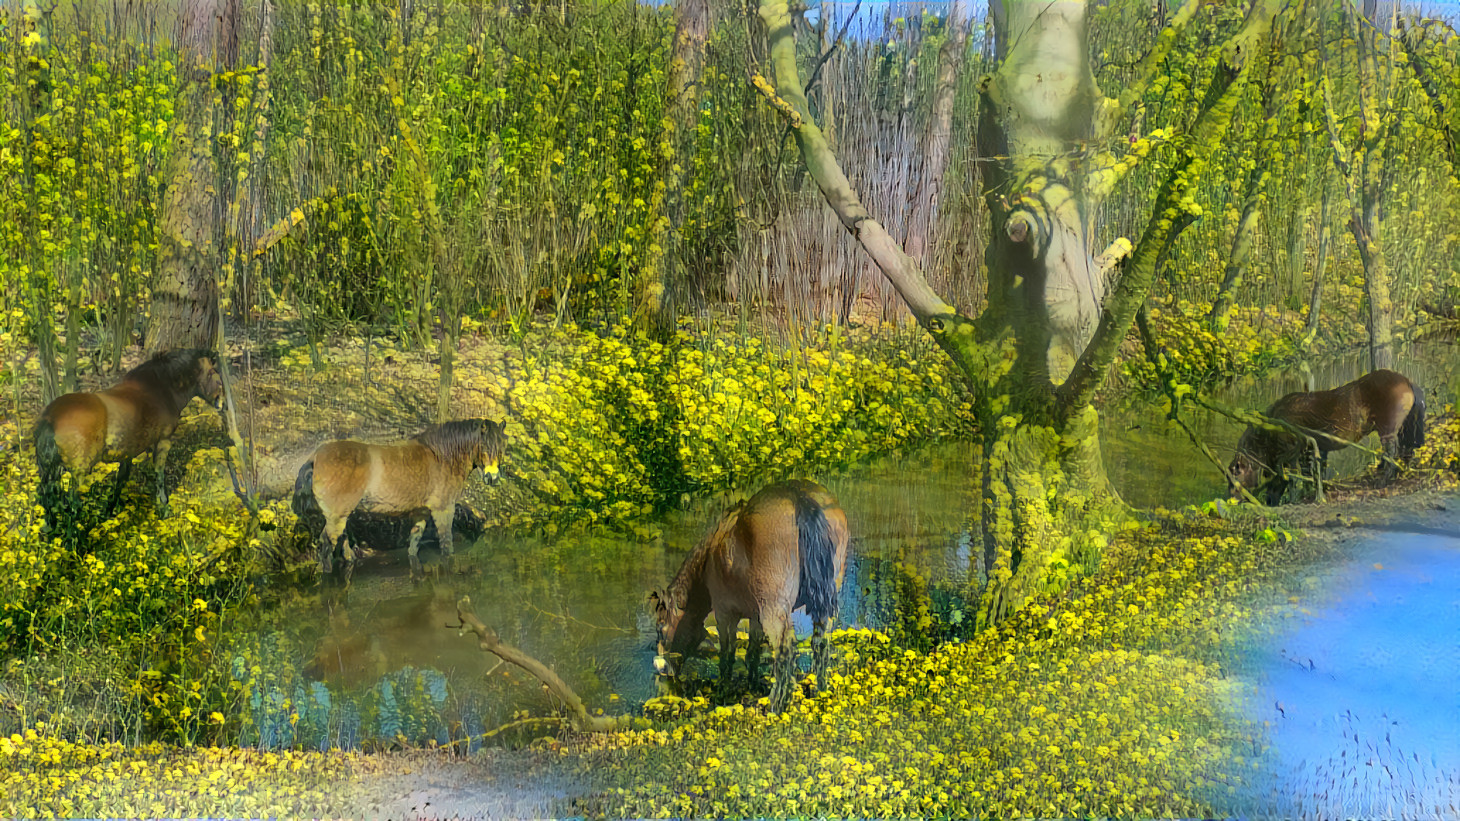 Wild horses in the forest.